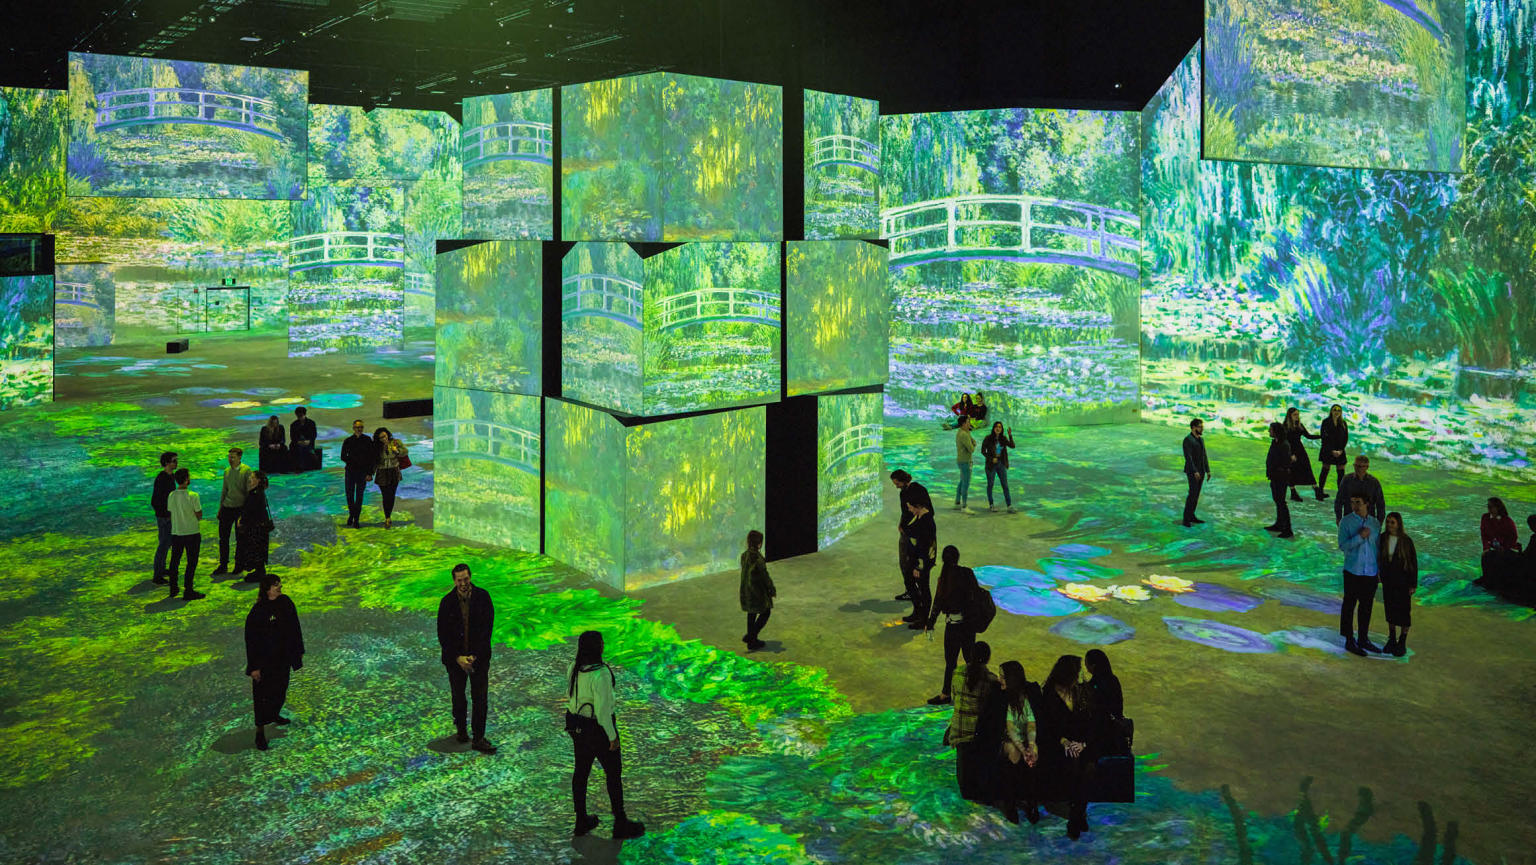 A group of individuals scattered around a spacious room adorned with an array of digital screens, including a central pillar of screens. The walls and screens showcase captivating artwork featuring Monet's renowned masterpiece, 'Bridge over a Pond of Water Lilies'. The immersive display transports viewers into the serene world of Monet's iconic creation.